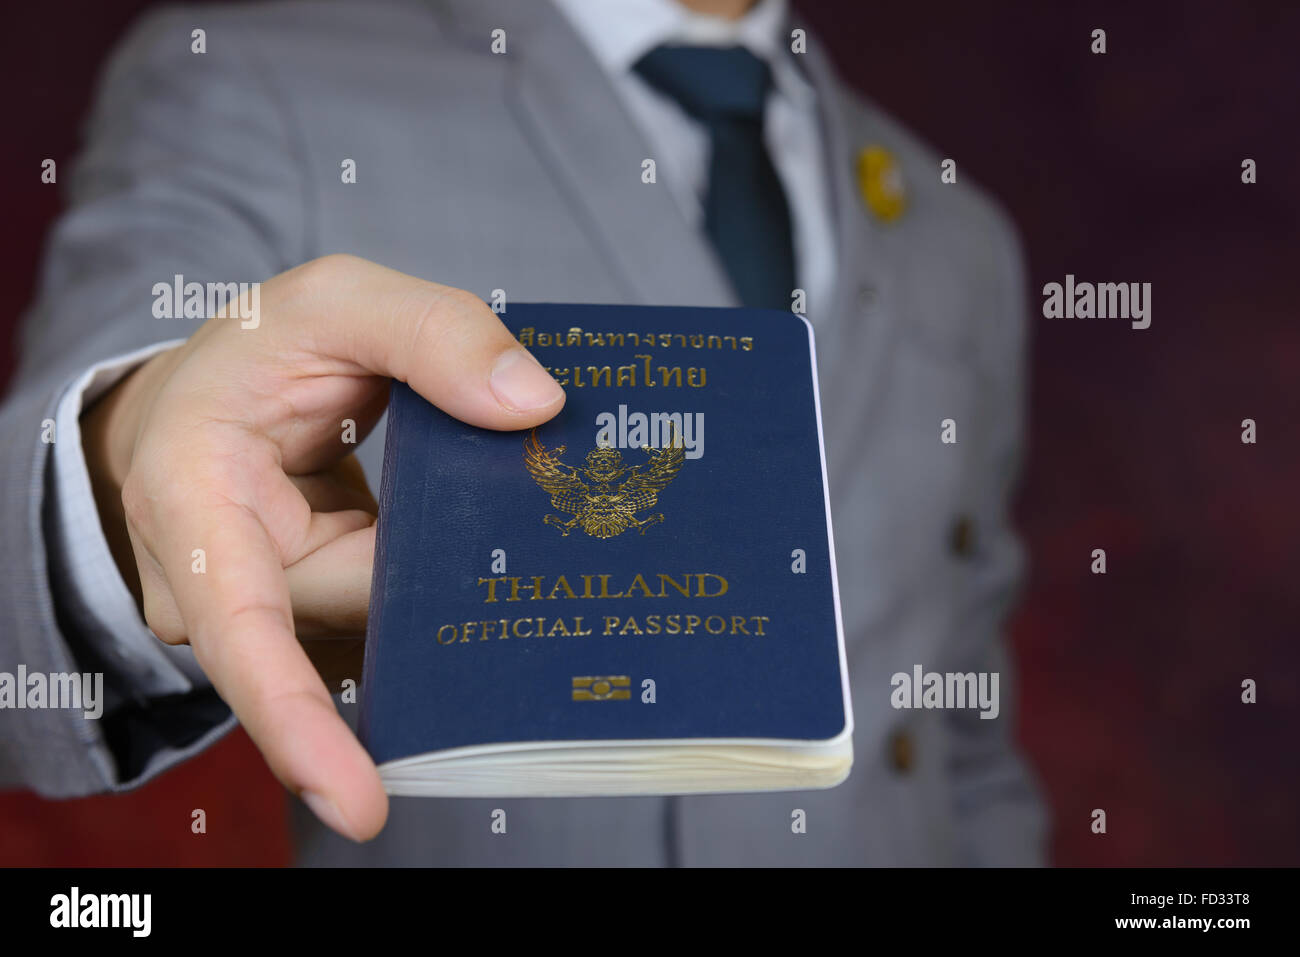 businessman in grey suit showing official passport to travel aboard, business trip Stock Photo